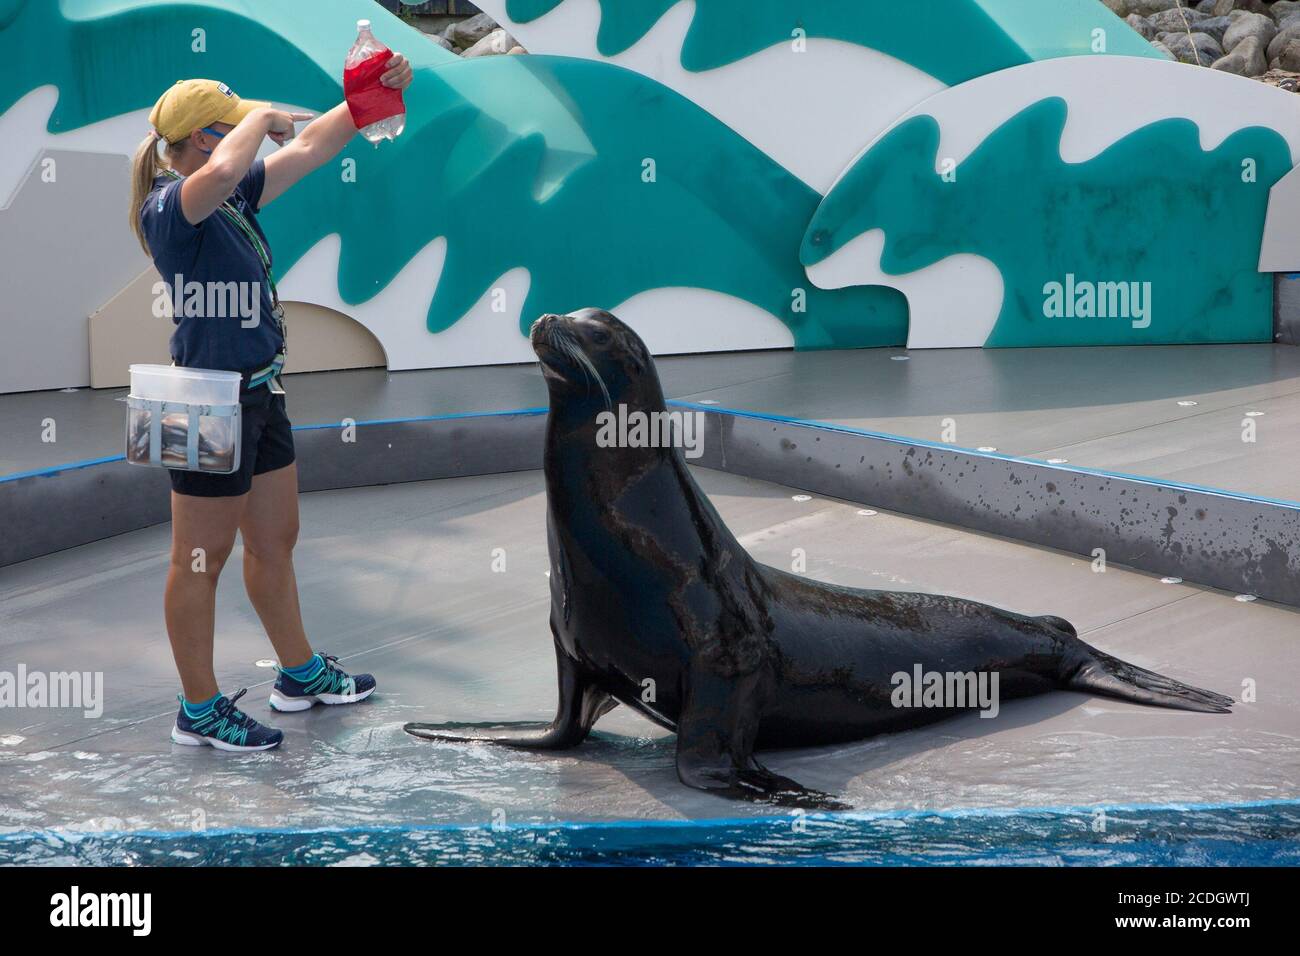 Brooklyn, NY, USA. 27th Aug, 2020. a trainer at re-opening of the New York City Aquarium in Coney Island in attendance for The New York Aquarium Reopens to the Public After Closing Due To Corona Virus, Coney Island, Brooklyn, NY August 27, 2020. Credit: Mark Doyle/Everett Collection/Alamy Live News Stock Photo